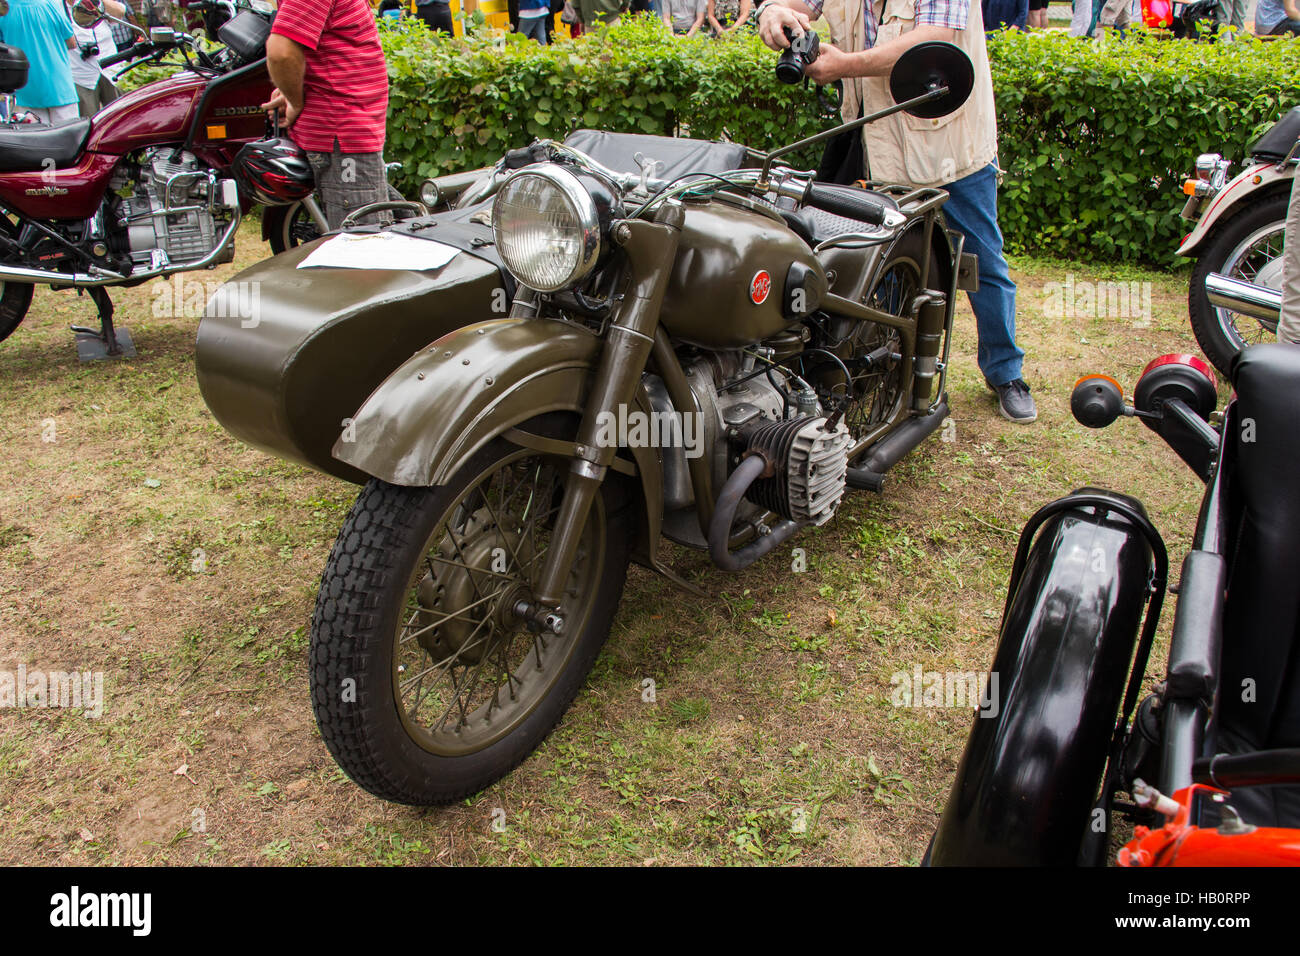 Motorrad Beiwagen High Resolution Stock Photography and Images - Alamy